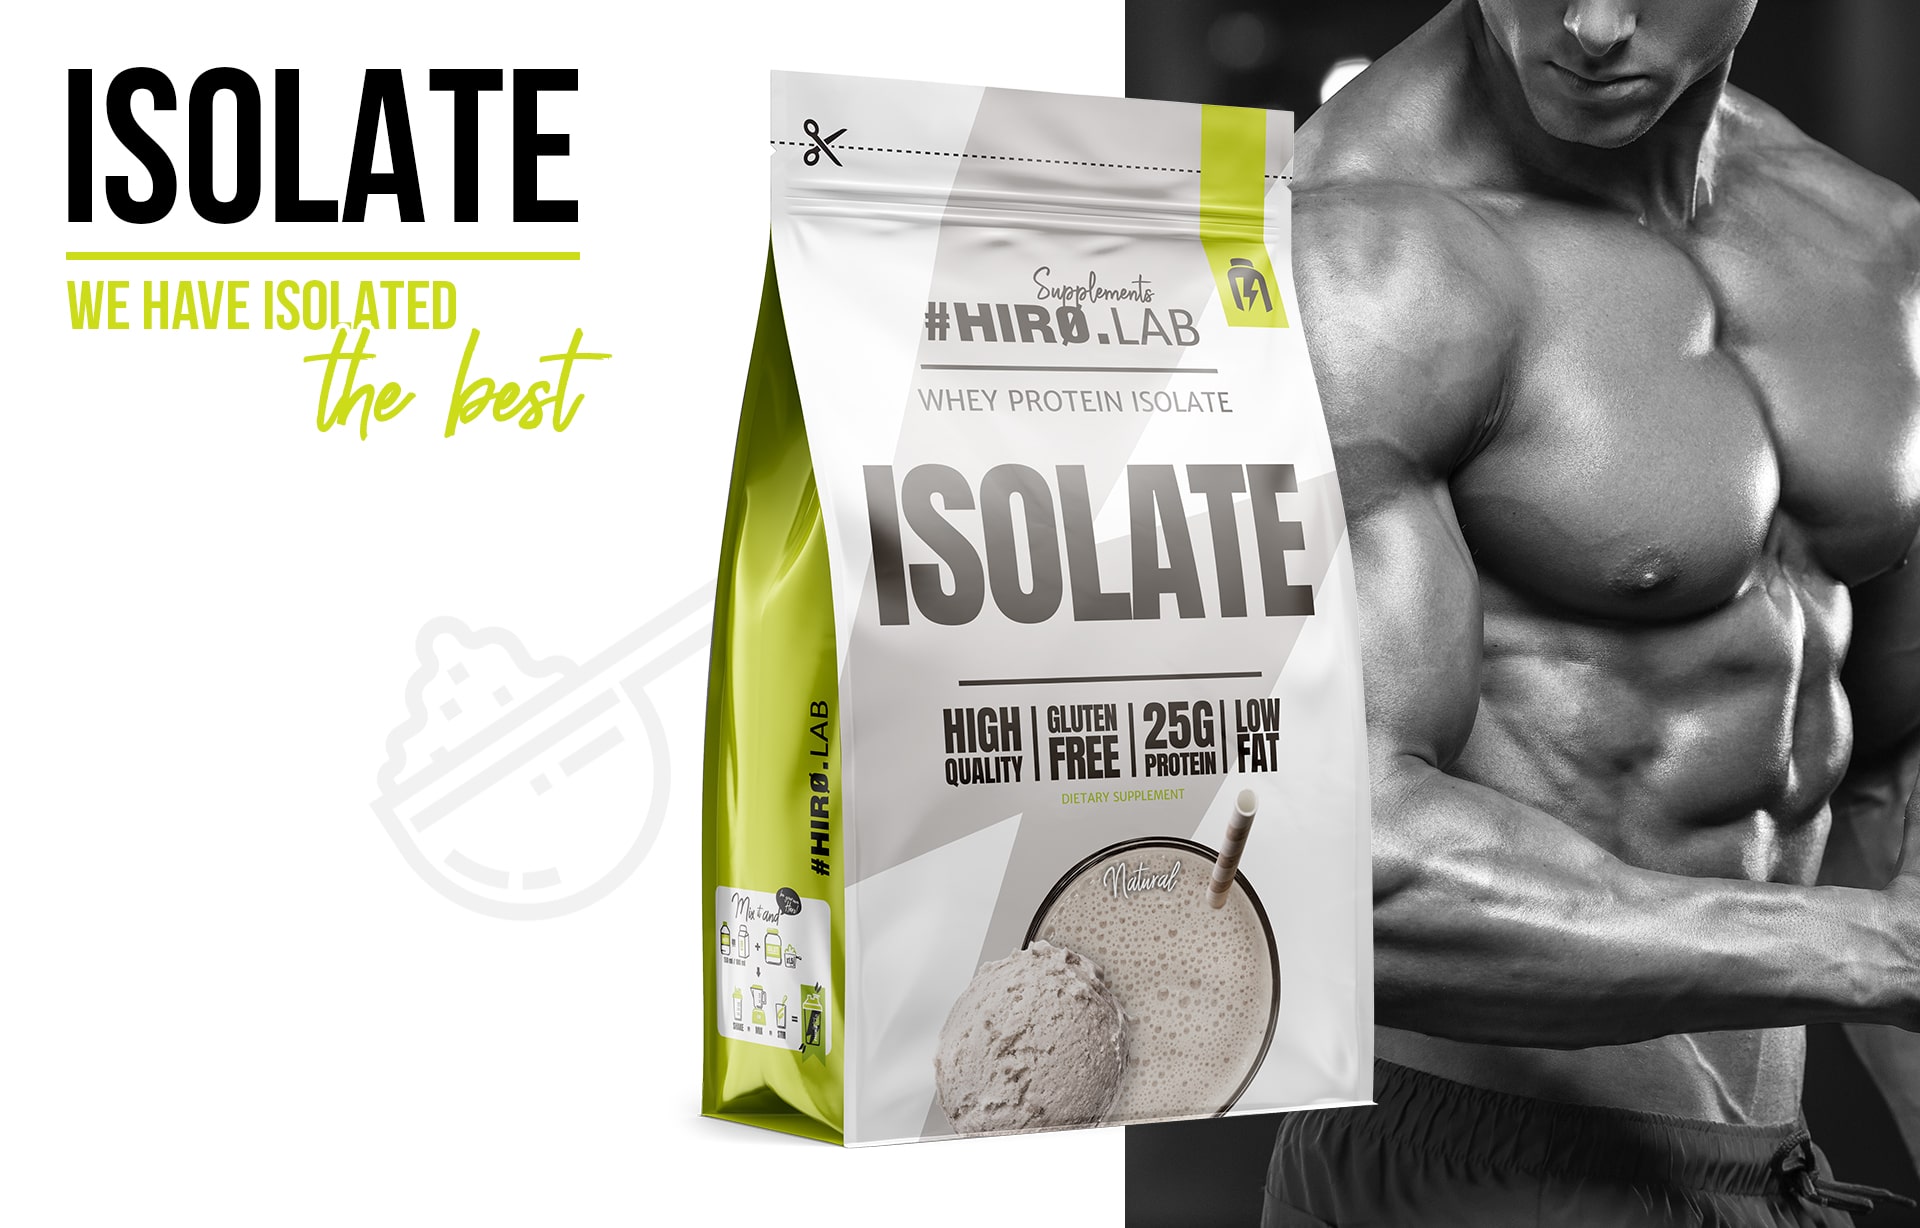 Hiro.Lab Whey Protein Isolate 700g